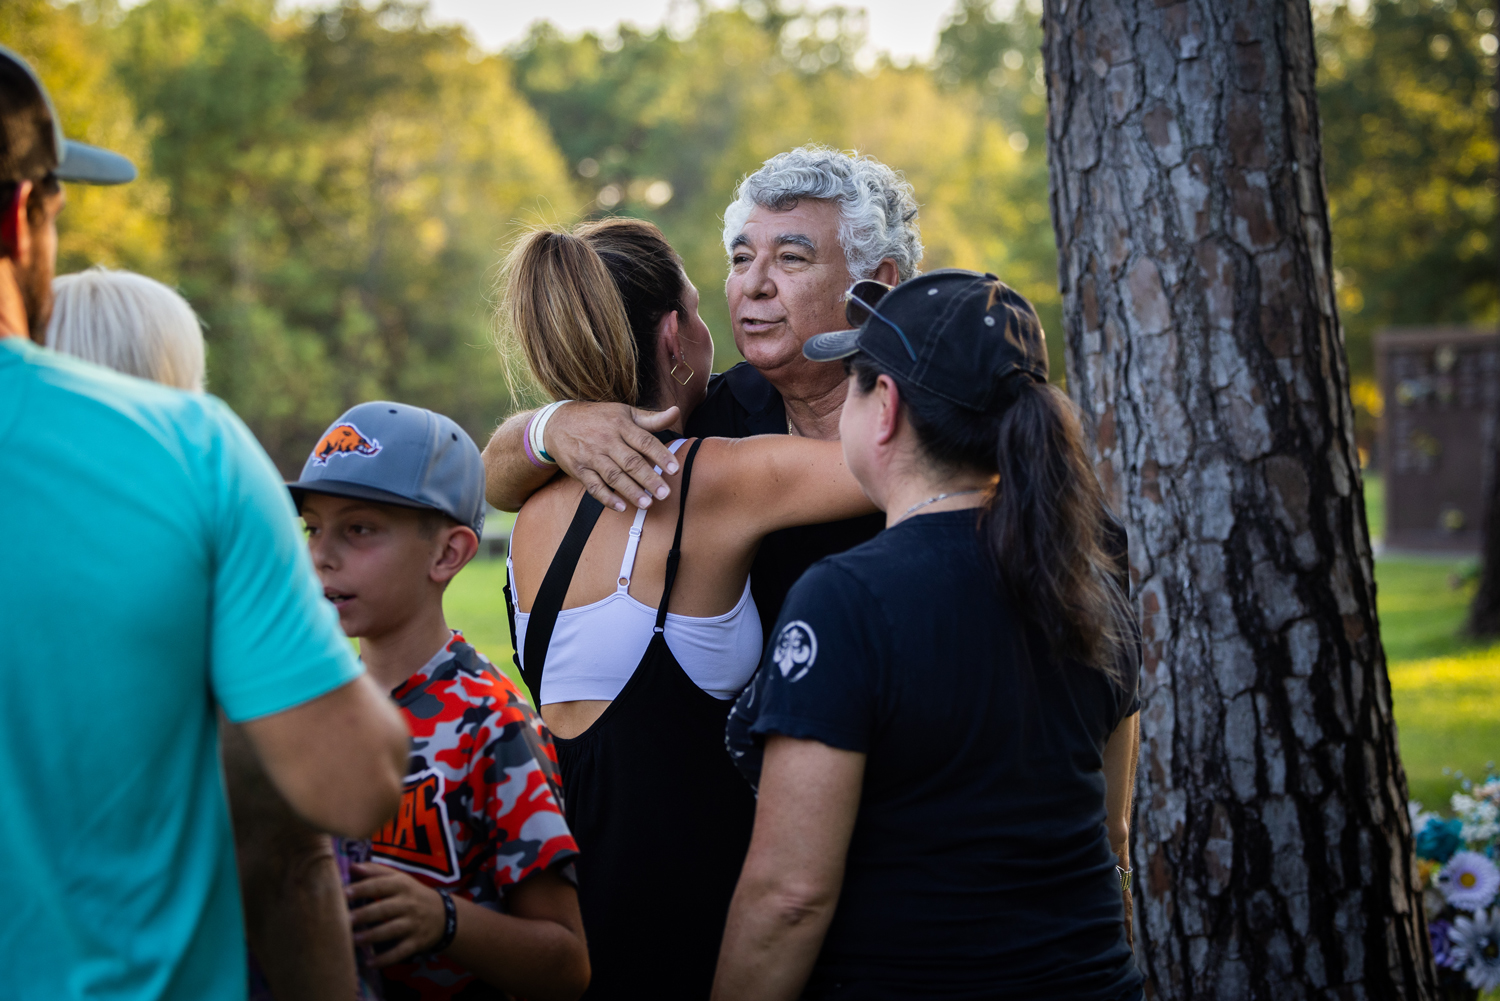 Jaime Chapa embraces his daughter, Jaime Newton, after spending time at his son-in-law, Walt's, grave. Walt died in 2018 following a heart attack at the Harris County Jail and his family is still struggling to find closure.